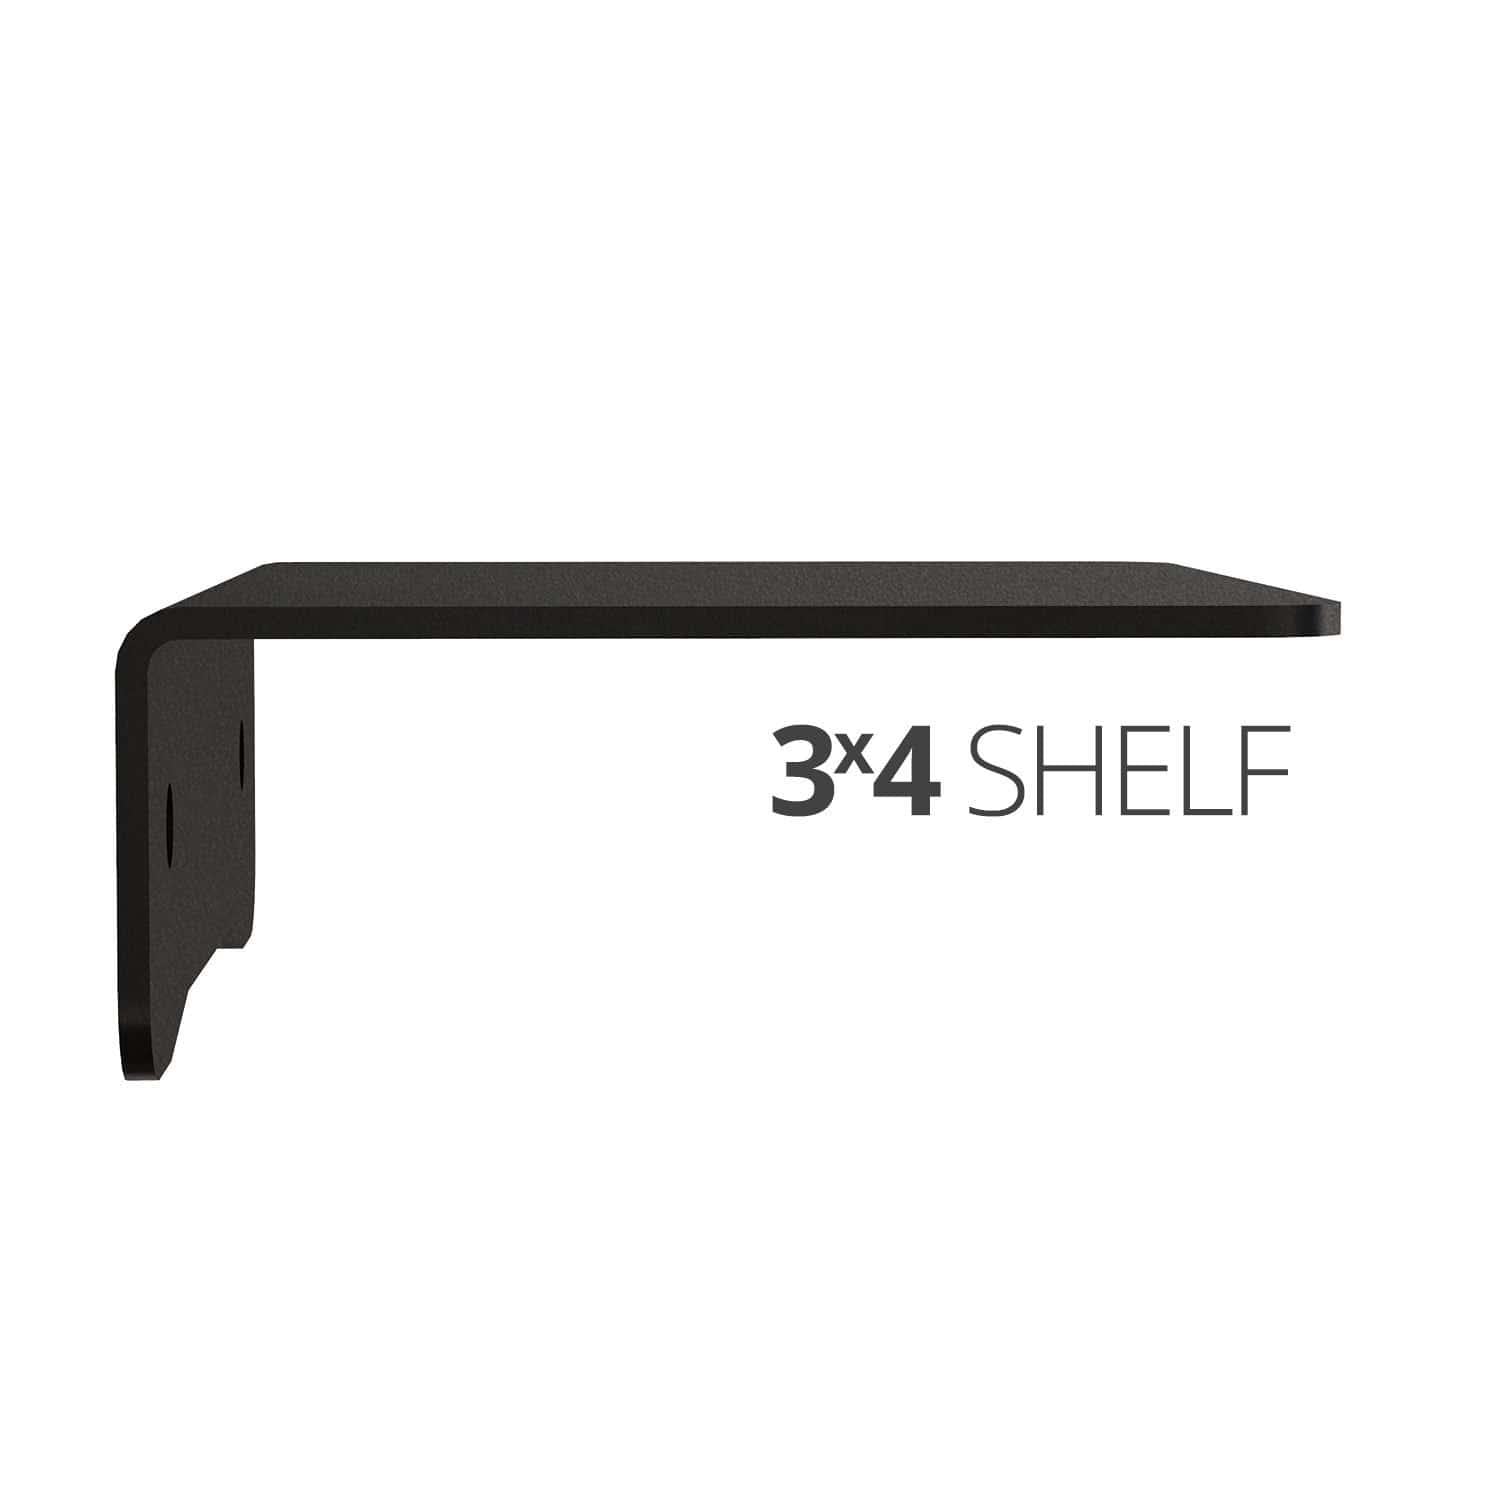 Small wall mounted shelf for home, office and garage - 3x4 side